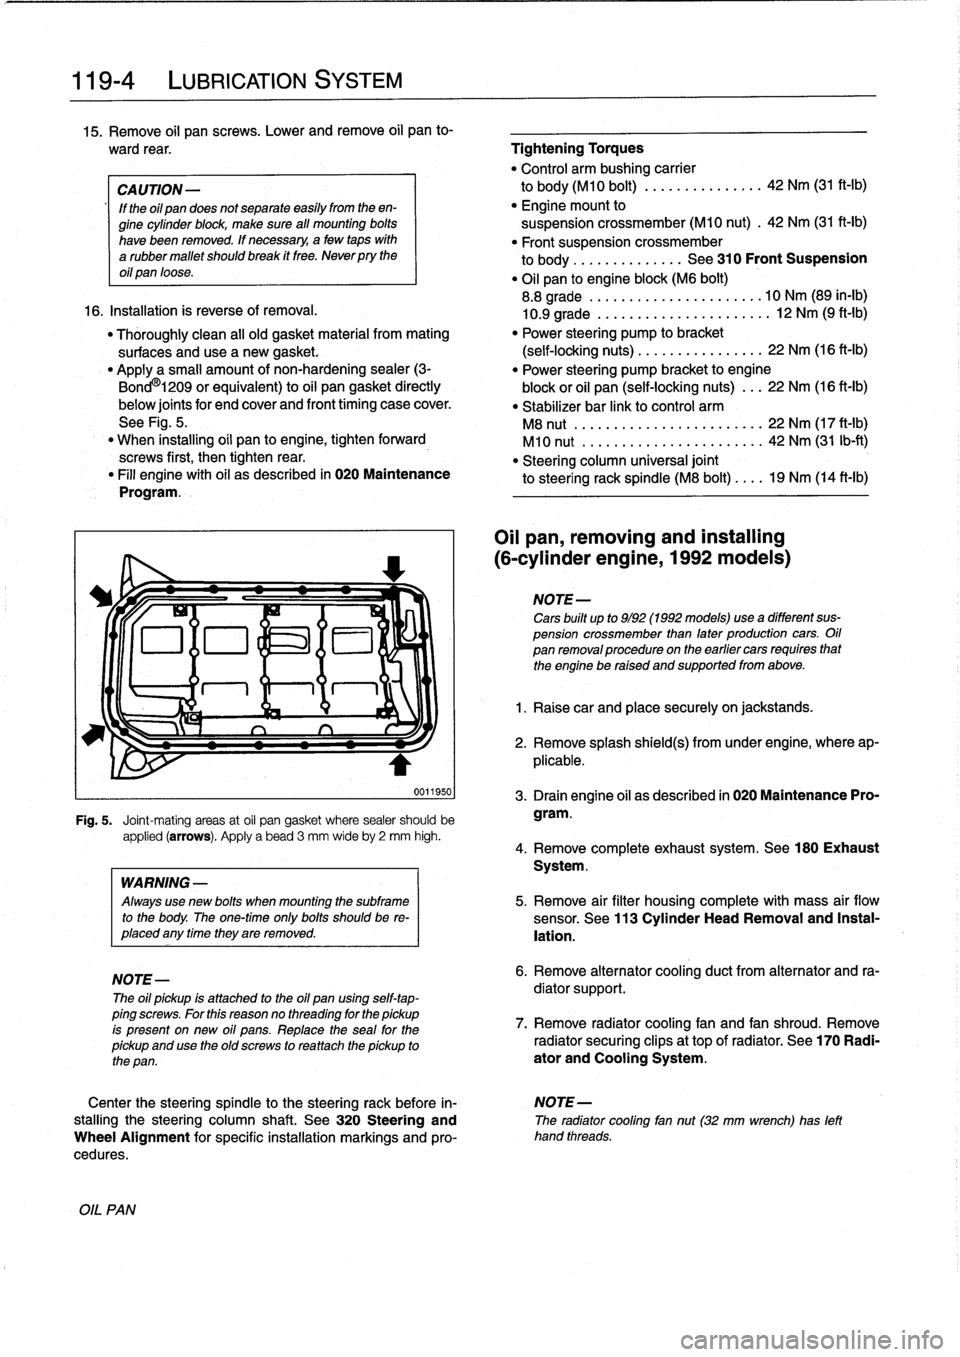 BMW 318i 1997 E36 Service Manual 
119-
4

	

LUBRICATION
SYSTEM

15
.
Remove
oil
pan
screws
.
Lower
andremove
oil
pan
to-

ward
rear
.

	

Tightening
Torques

"
Control
arm
bushing
carrier

CAUTION-

	

to
body(M10
bolt)
............